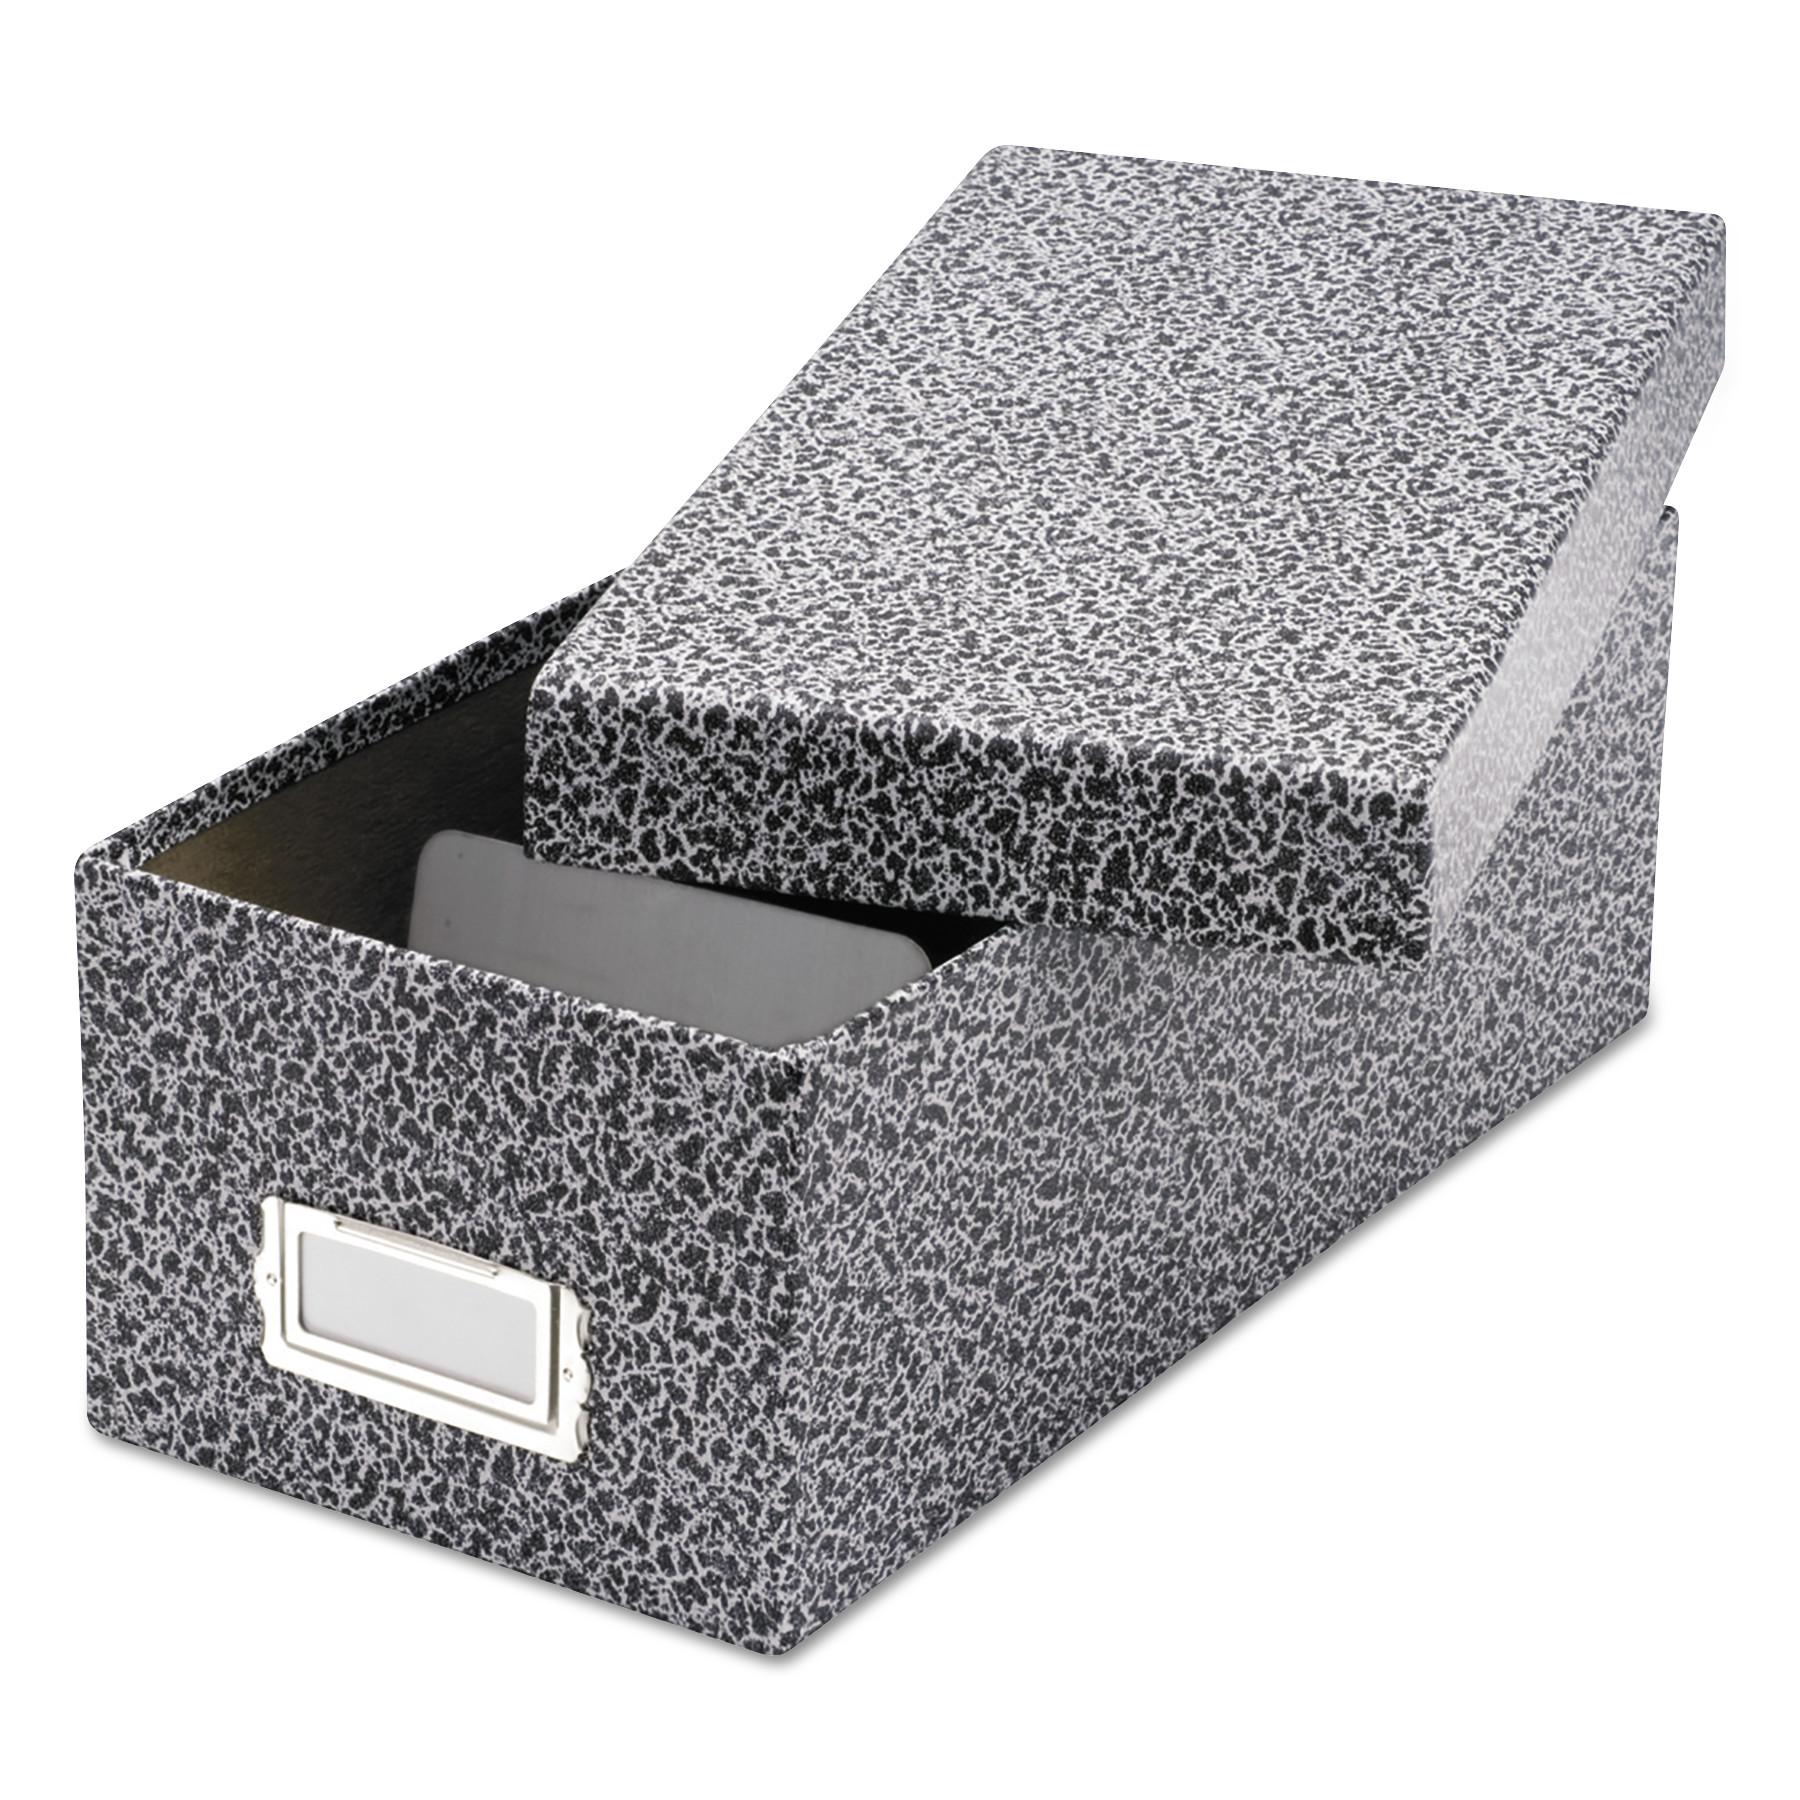  Oxford 40588 Reinforced Board Card File, Lift-Off Cover, Holds 1,200 3 x 5 Cards, Black/White (OXF40588) 